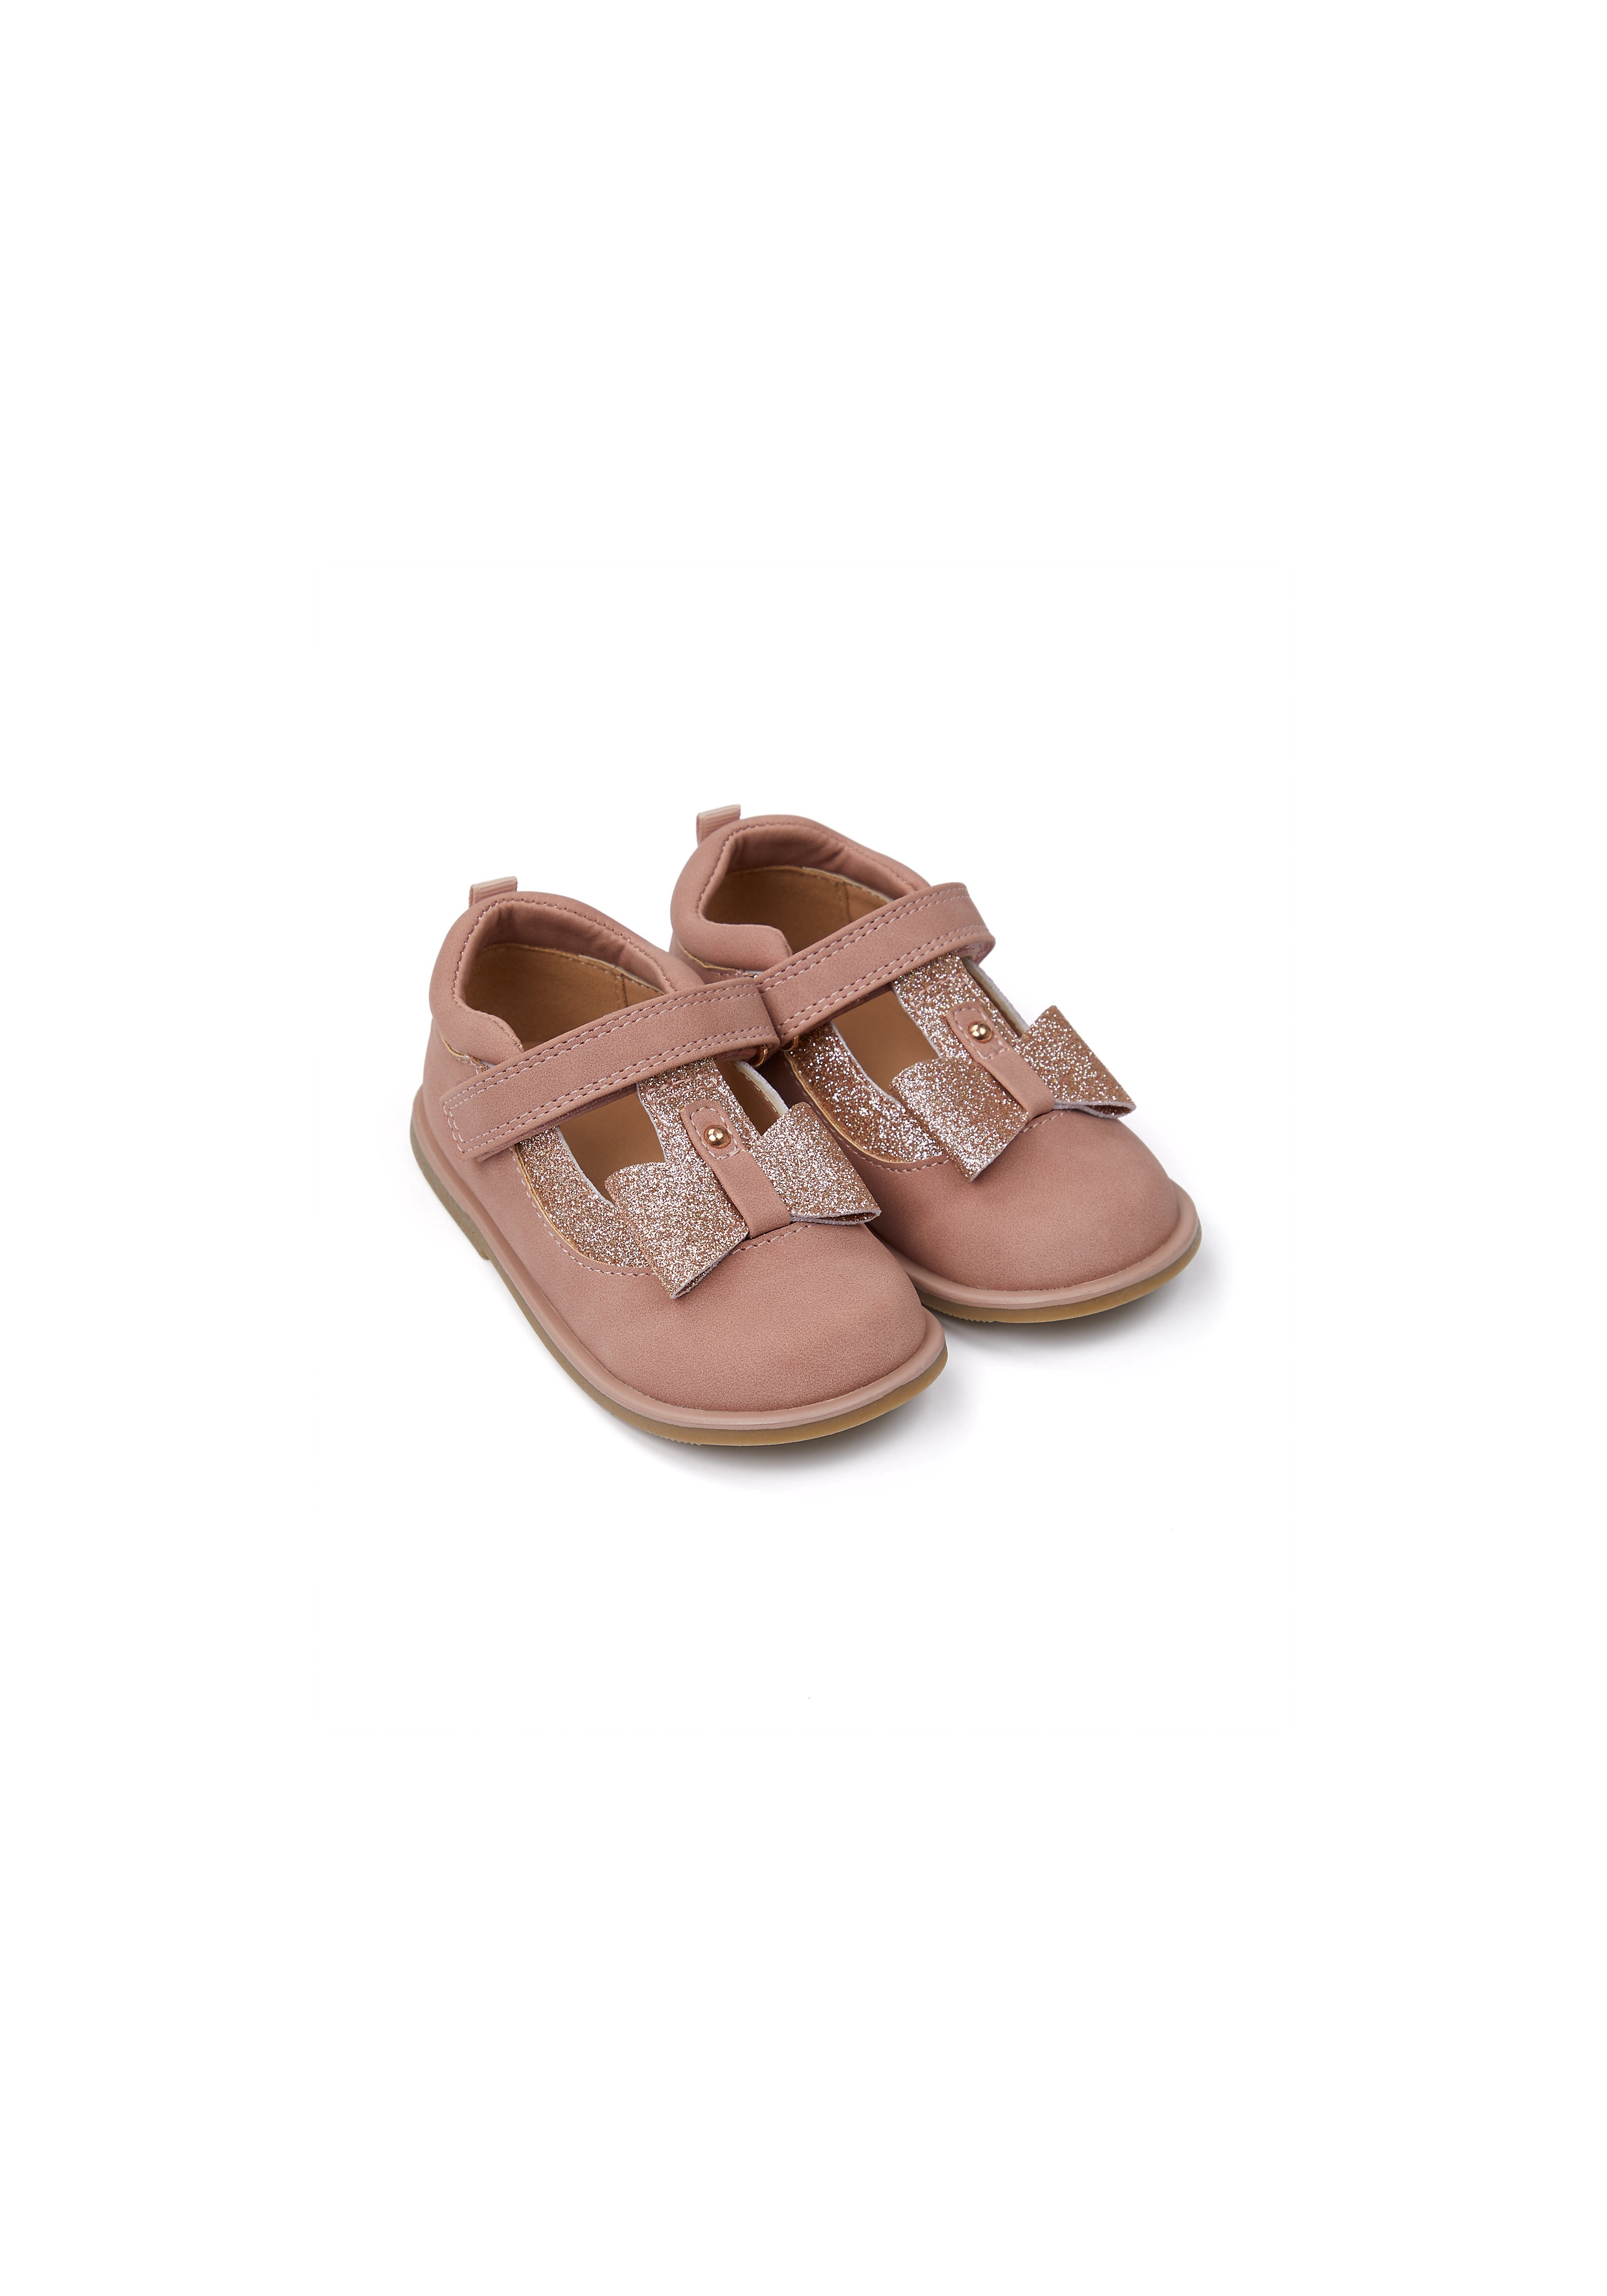 Mothercare | Girls First Walker Shoes Glitter Bow Detail - Pink